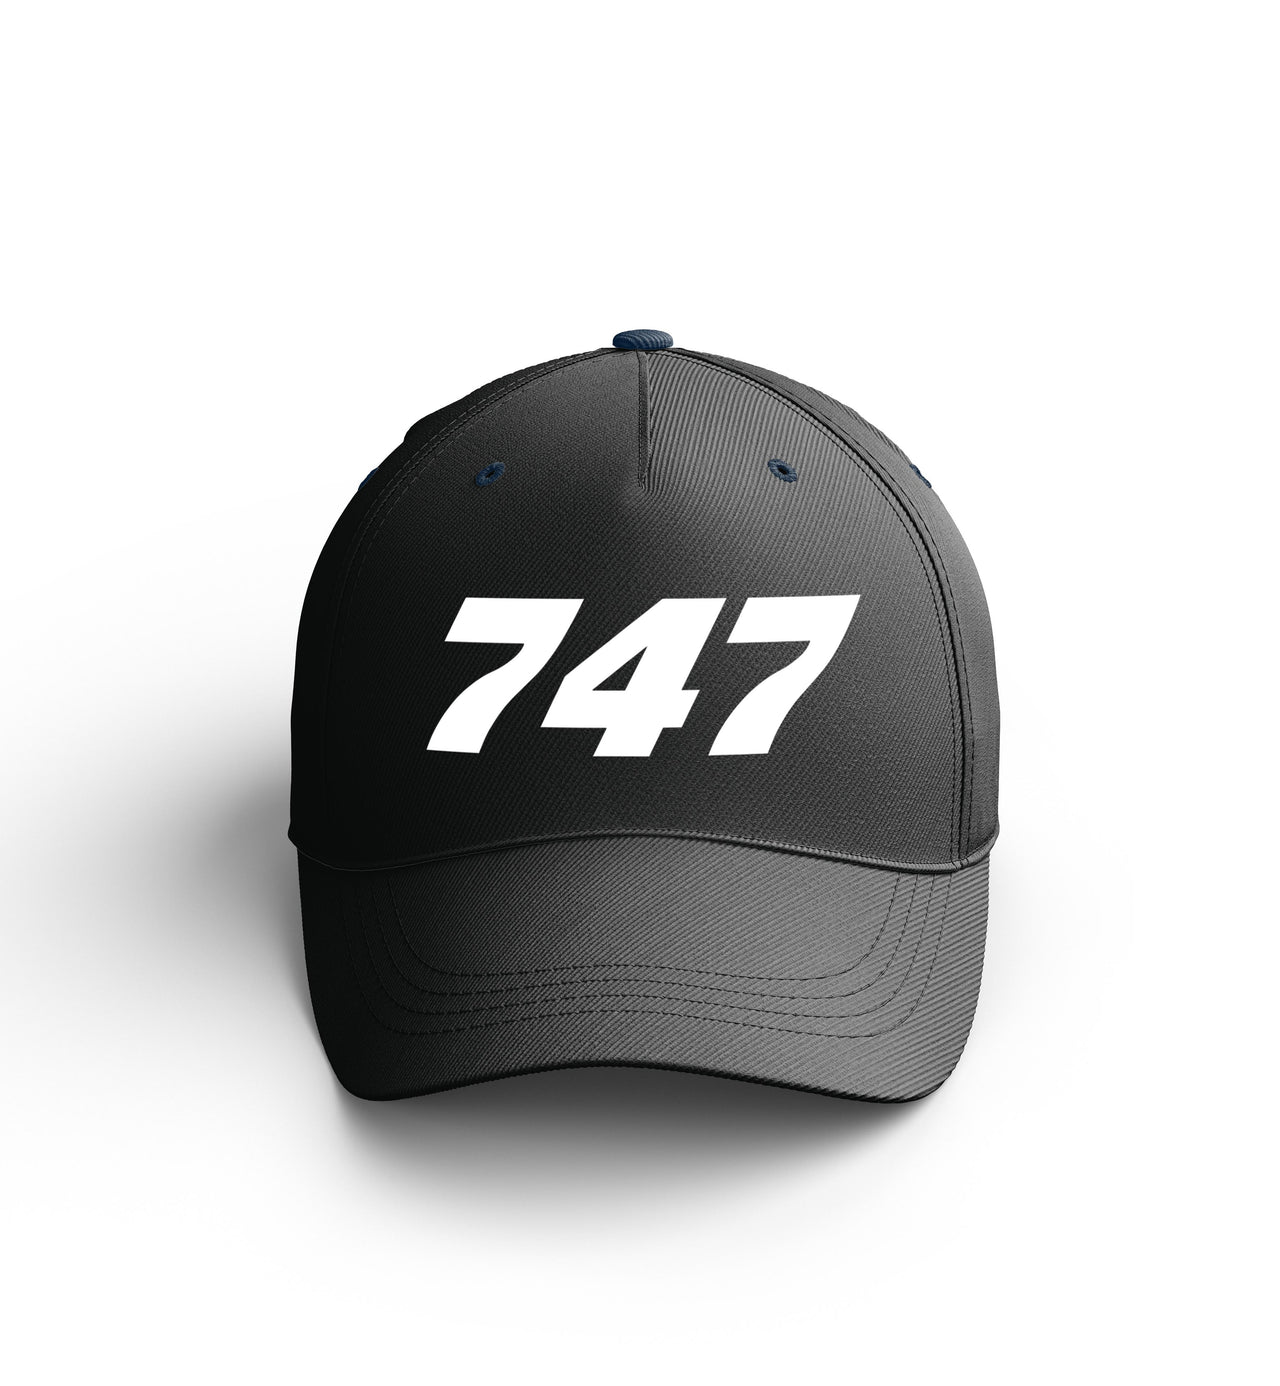 Customizable Name & 747 Flat Text Embroidered Hats